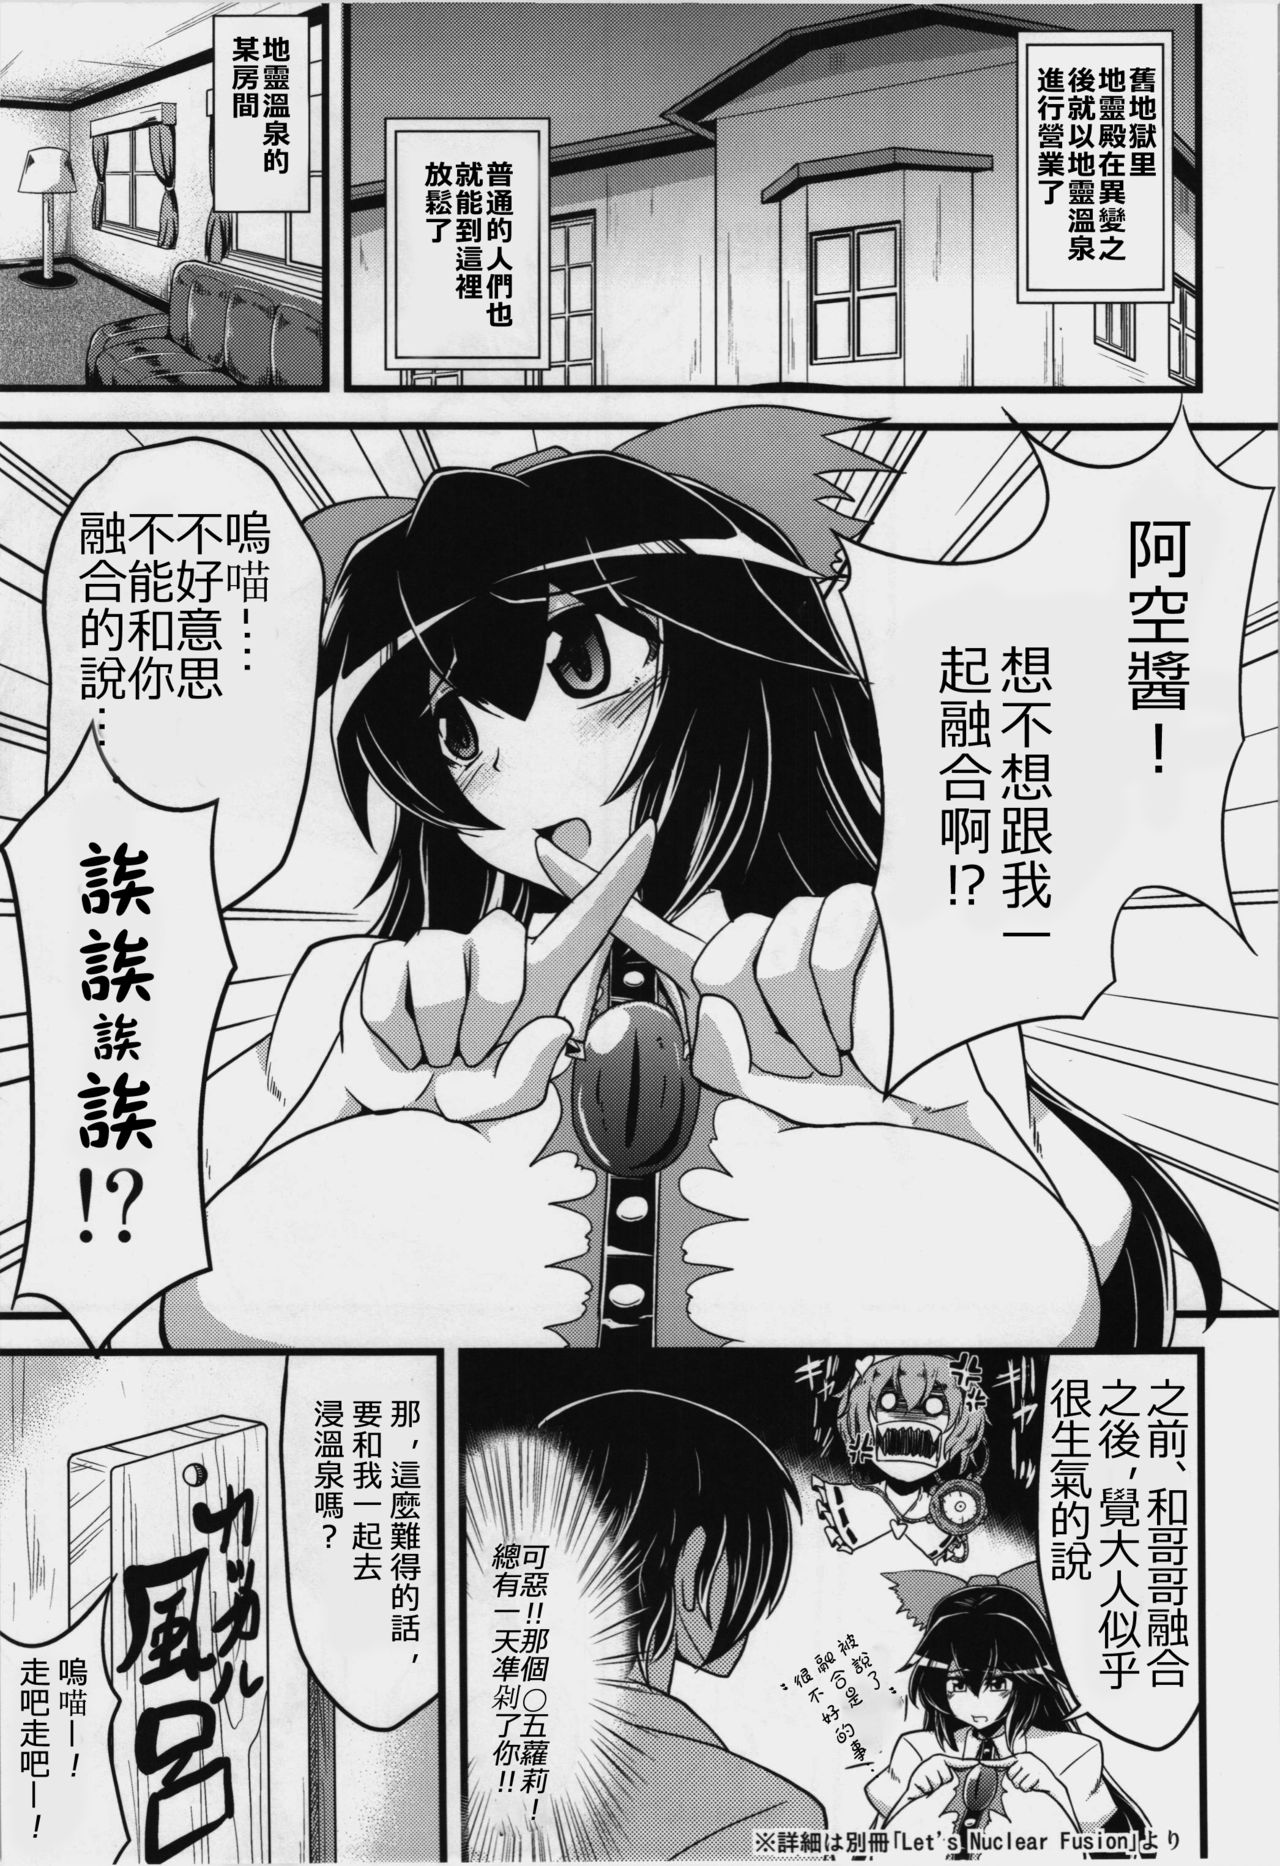 (Reitaisai 11) [CUNICULUS, Forever and ever... (Yositama, Eisen)] Double Unyuho (Touhou Project) [Chinese] [oo君の個人漢化] (例大祭11) [CUNICULUS、Forever and ever... (英戦、ヨシタマ)] だぶるうにゅほ (東方Project) [中文翻譯]